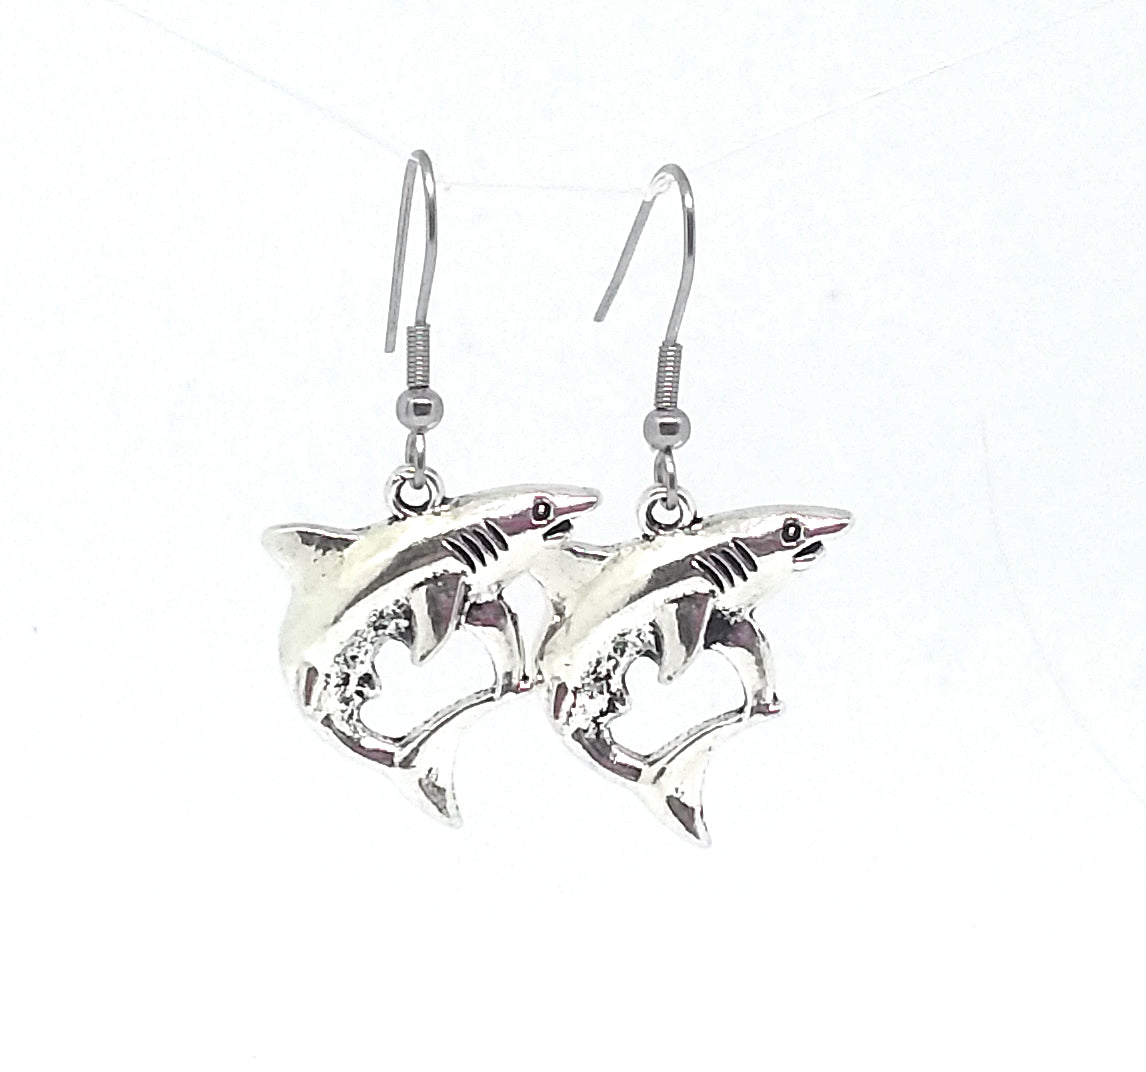 Shark Dangle Earrings with Stainless Steel Ear Wires